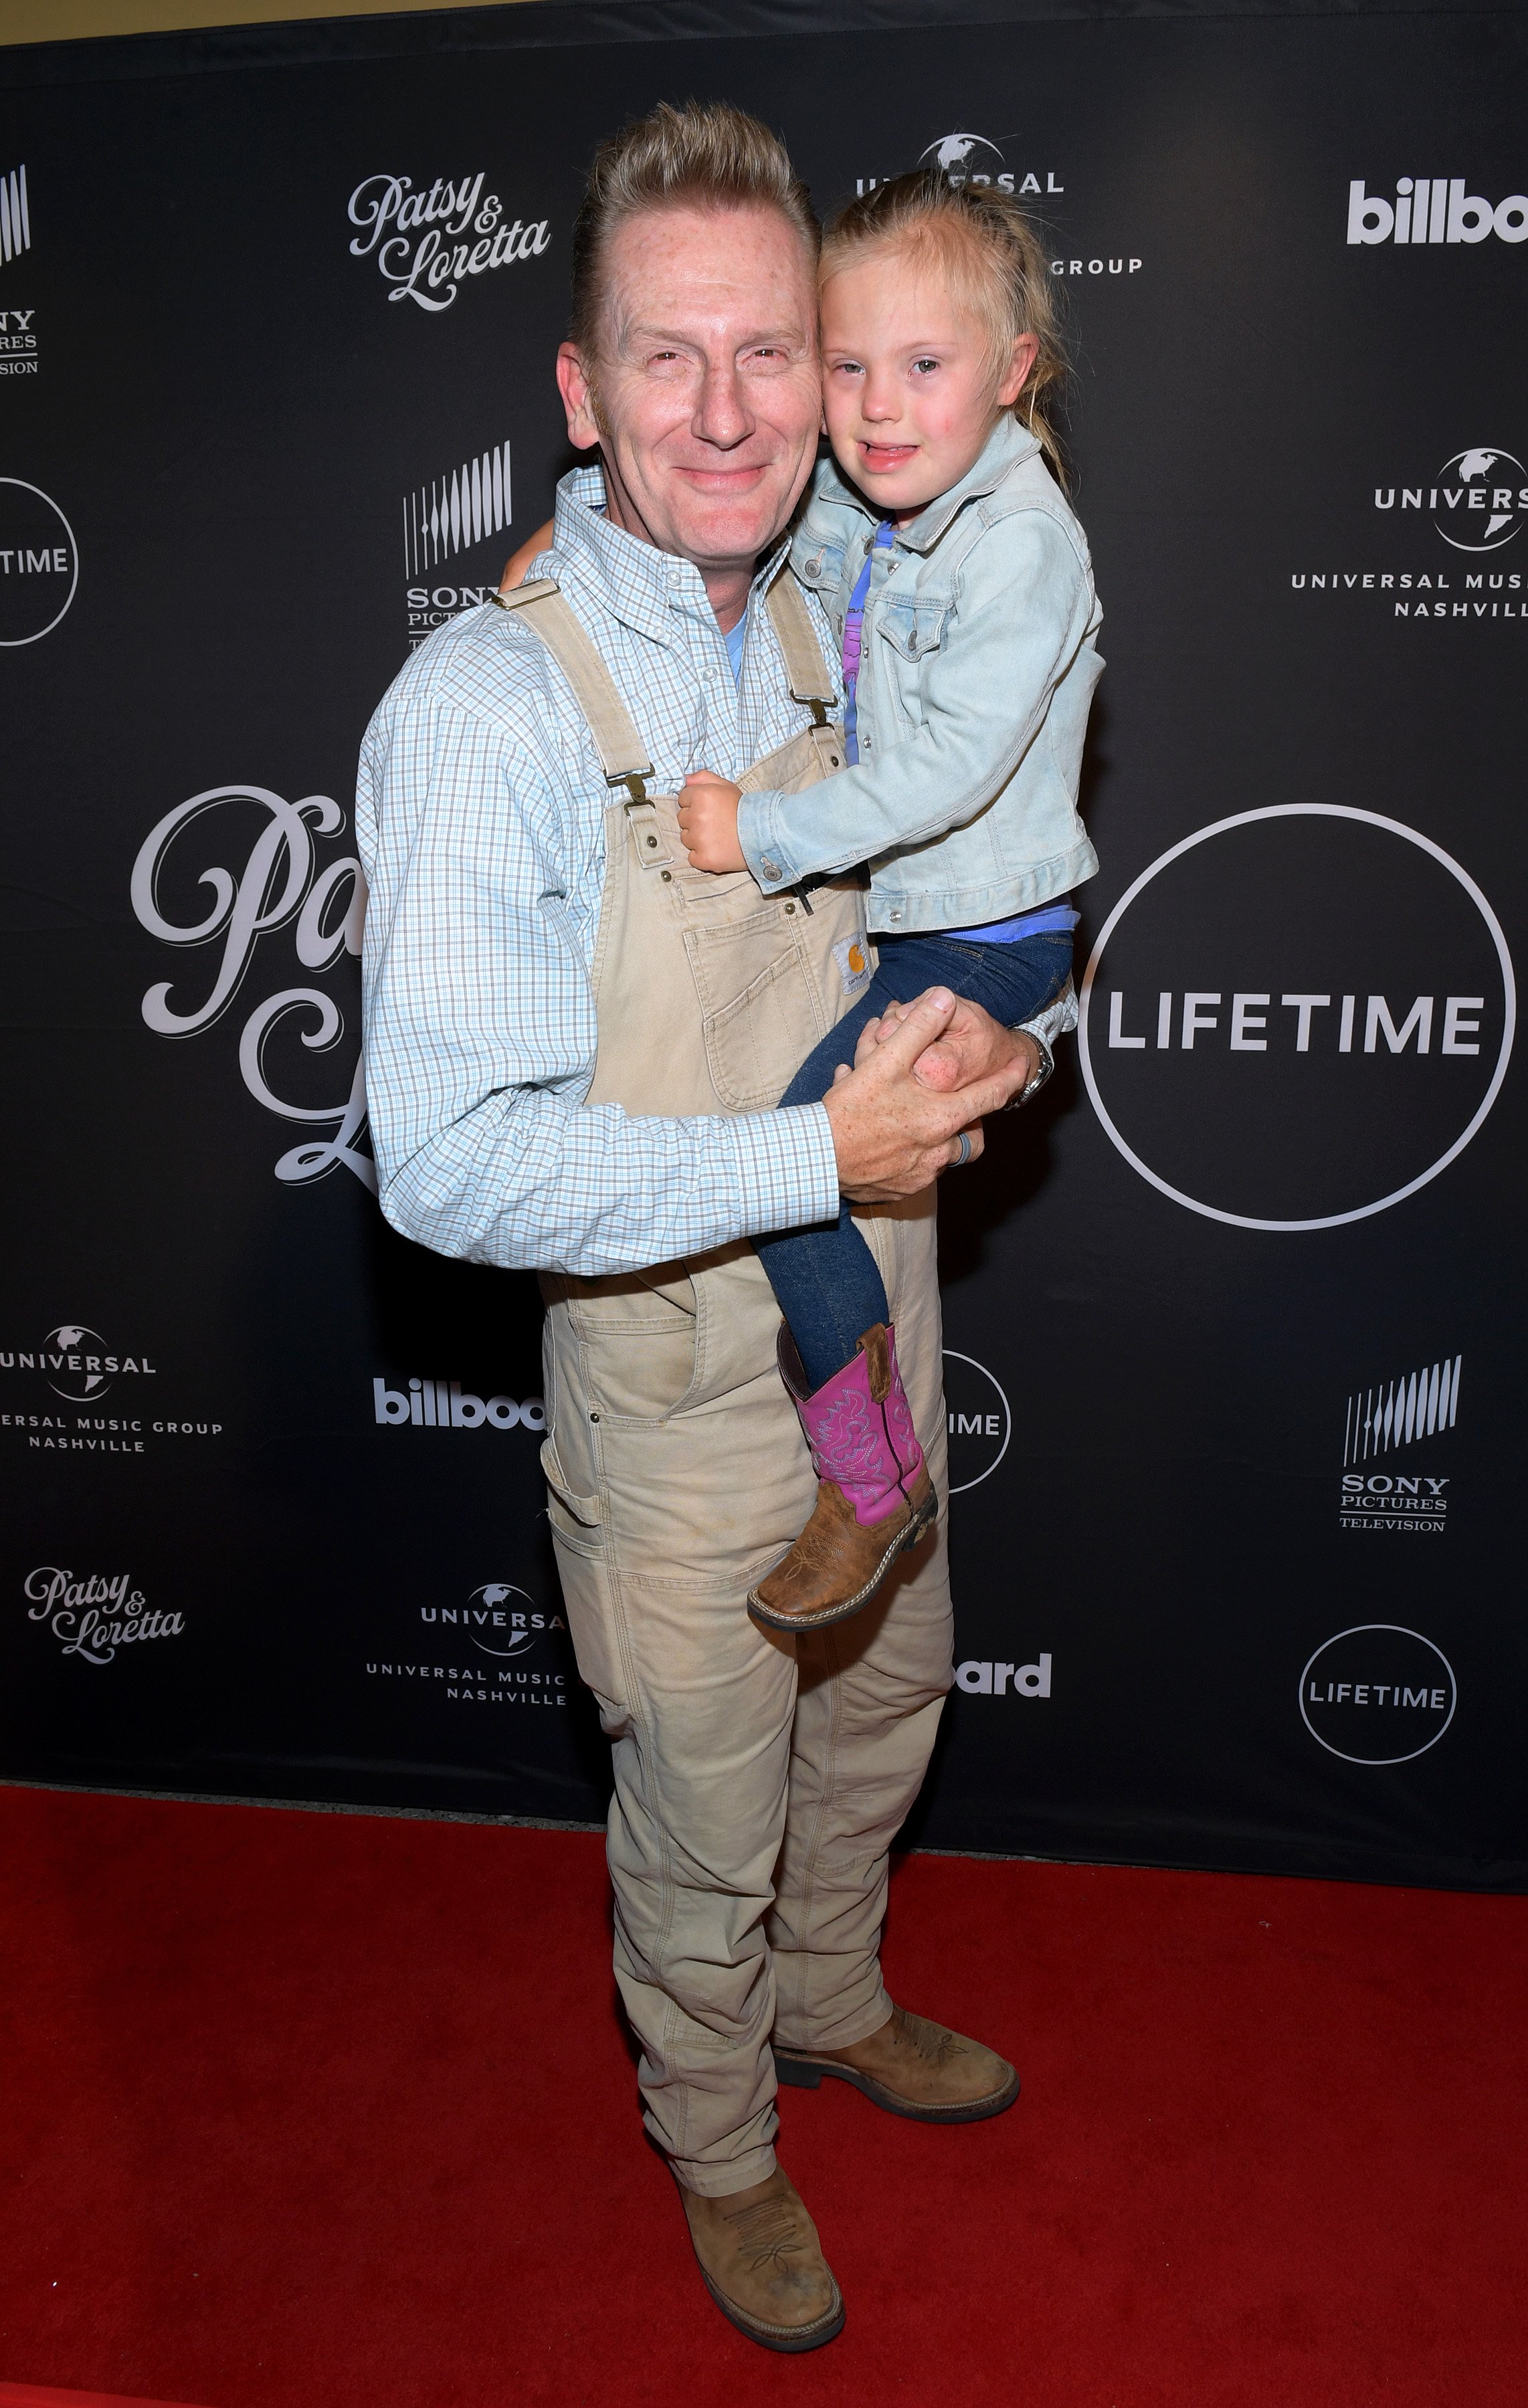 Rory Feek and daughter Indiana Feek attend a special screening and reception for "Patsy & Loretta" on October 09, 2019 in Franklin, Tennessee. | Source: Getty Images.